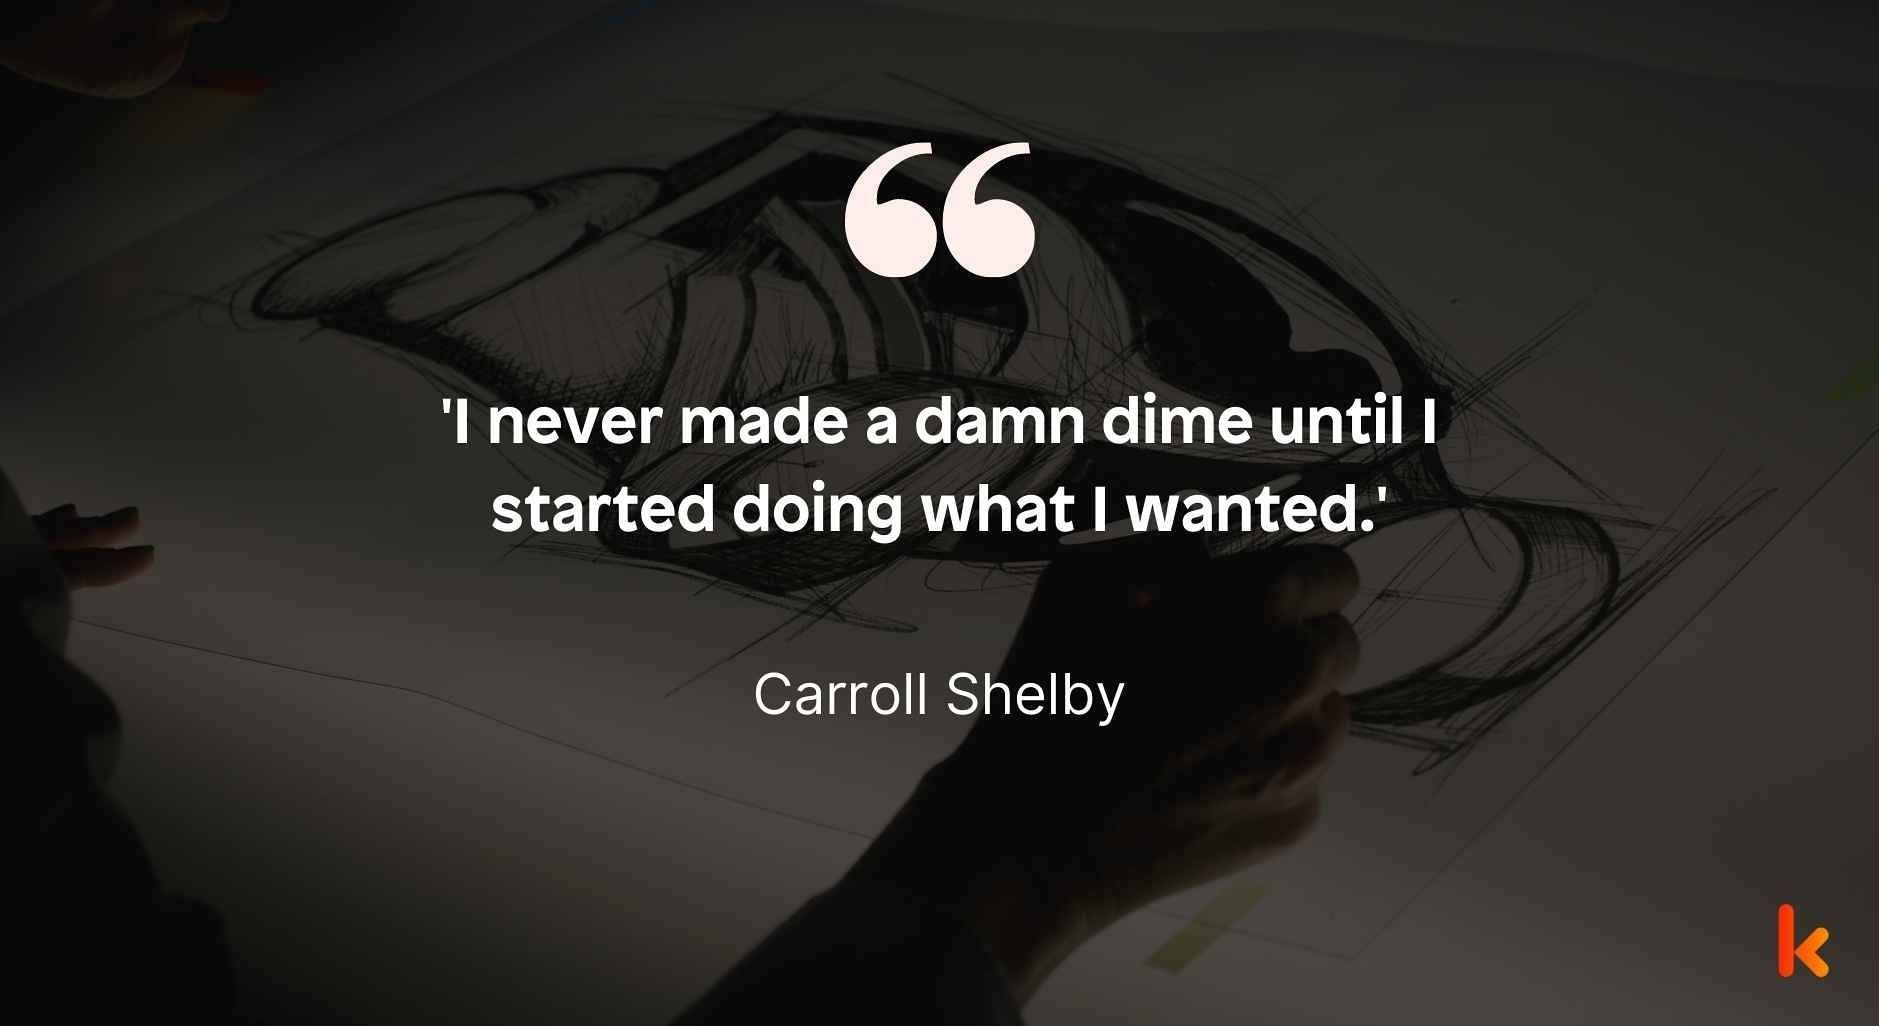 These quotes provide insight into the philosophy of Carroll Shelby.